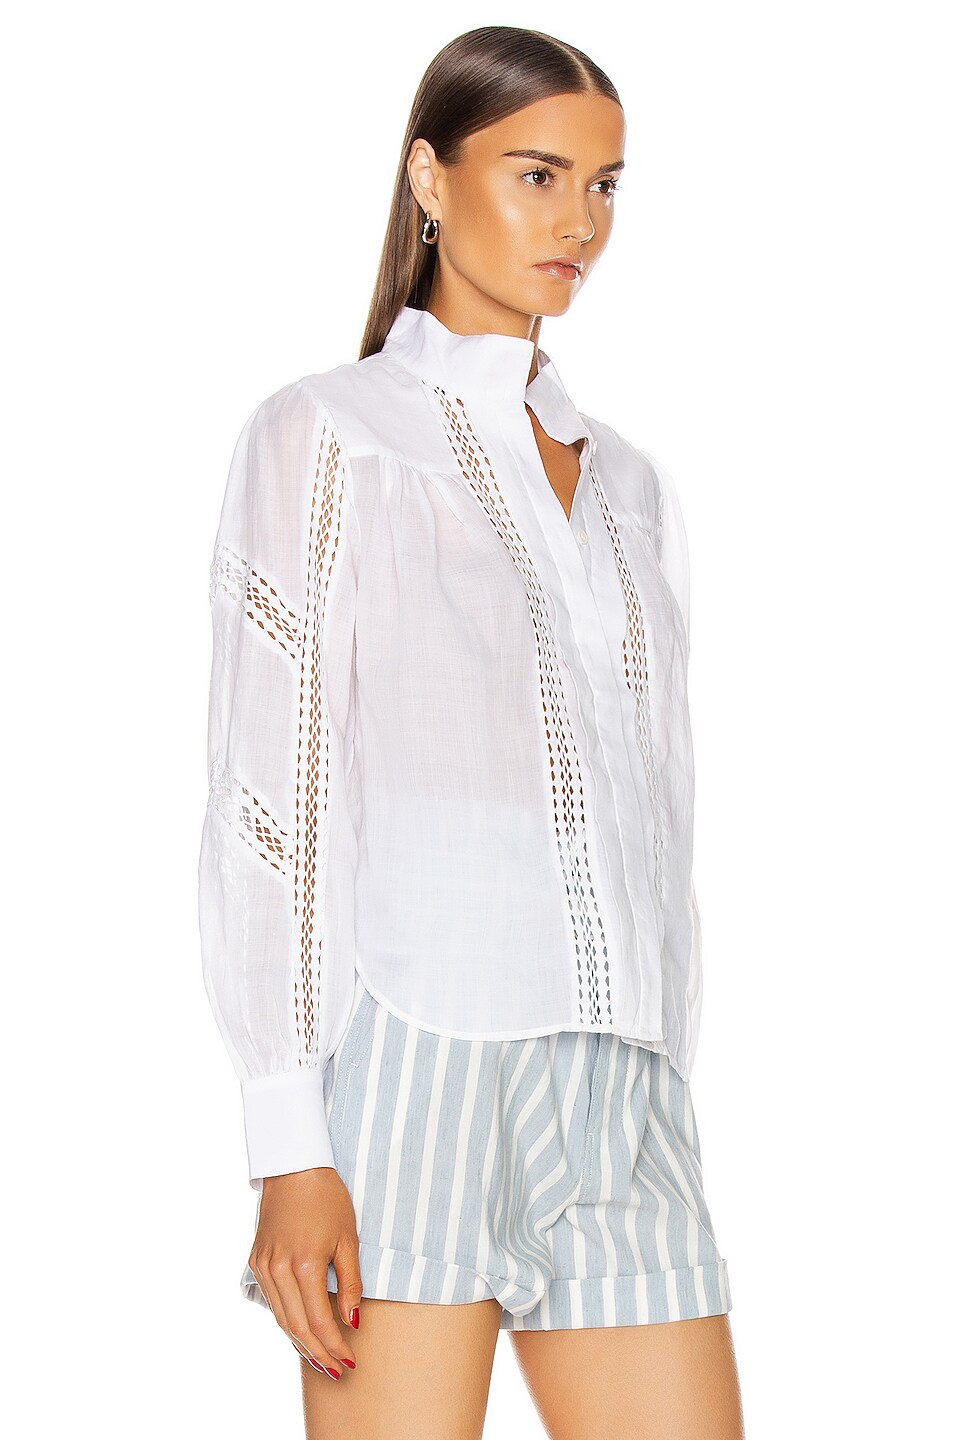 FRAME Panel Lace Button Up Top in Blanc | FWRD